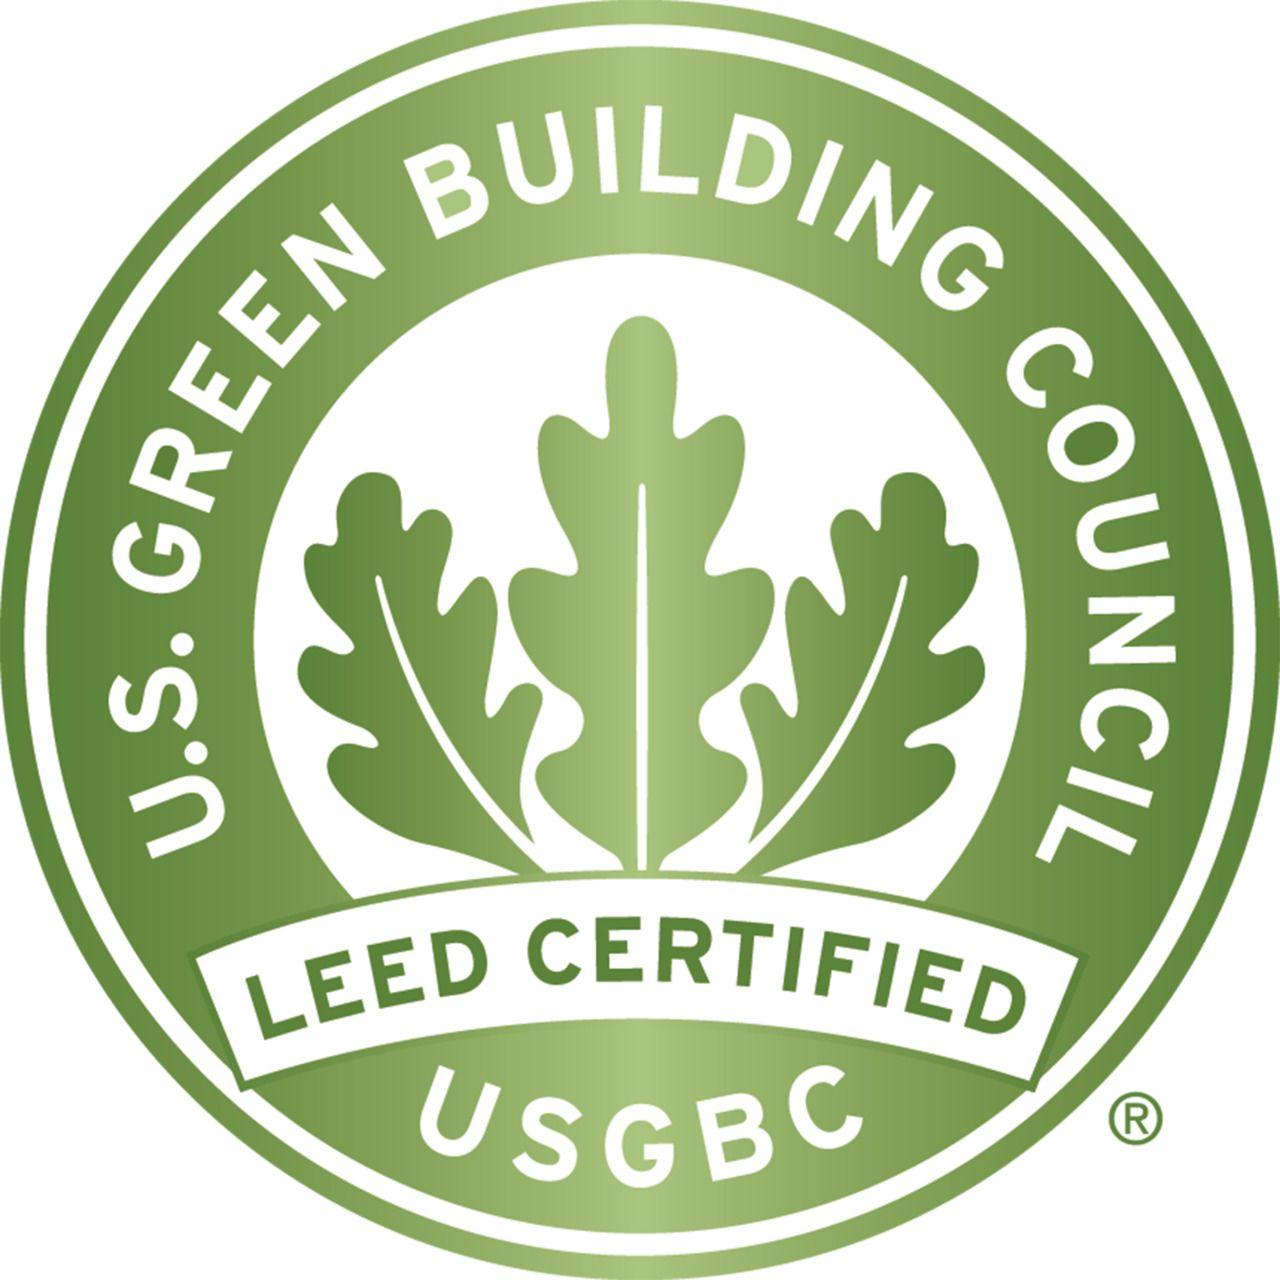 LEED-certified Logo - USGBC Names Illinois as Top State for LEED Green Building